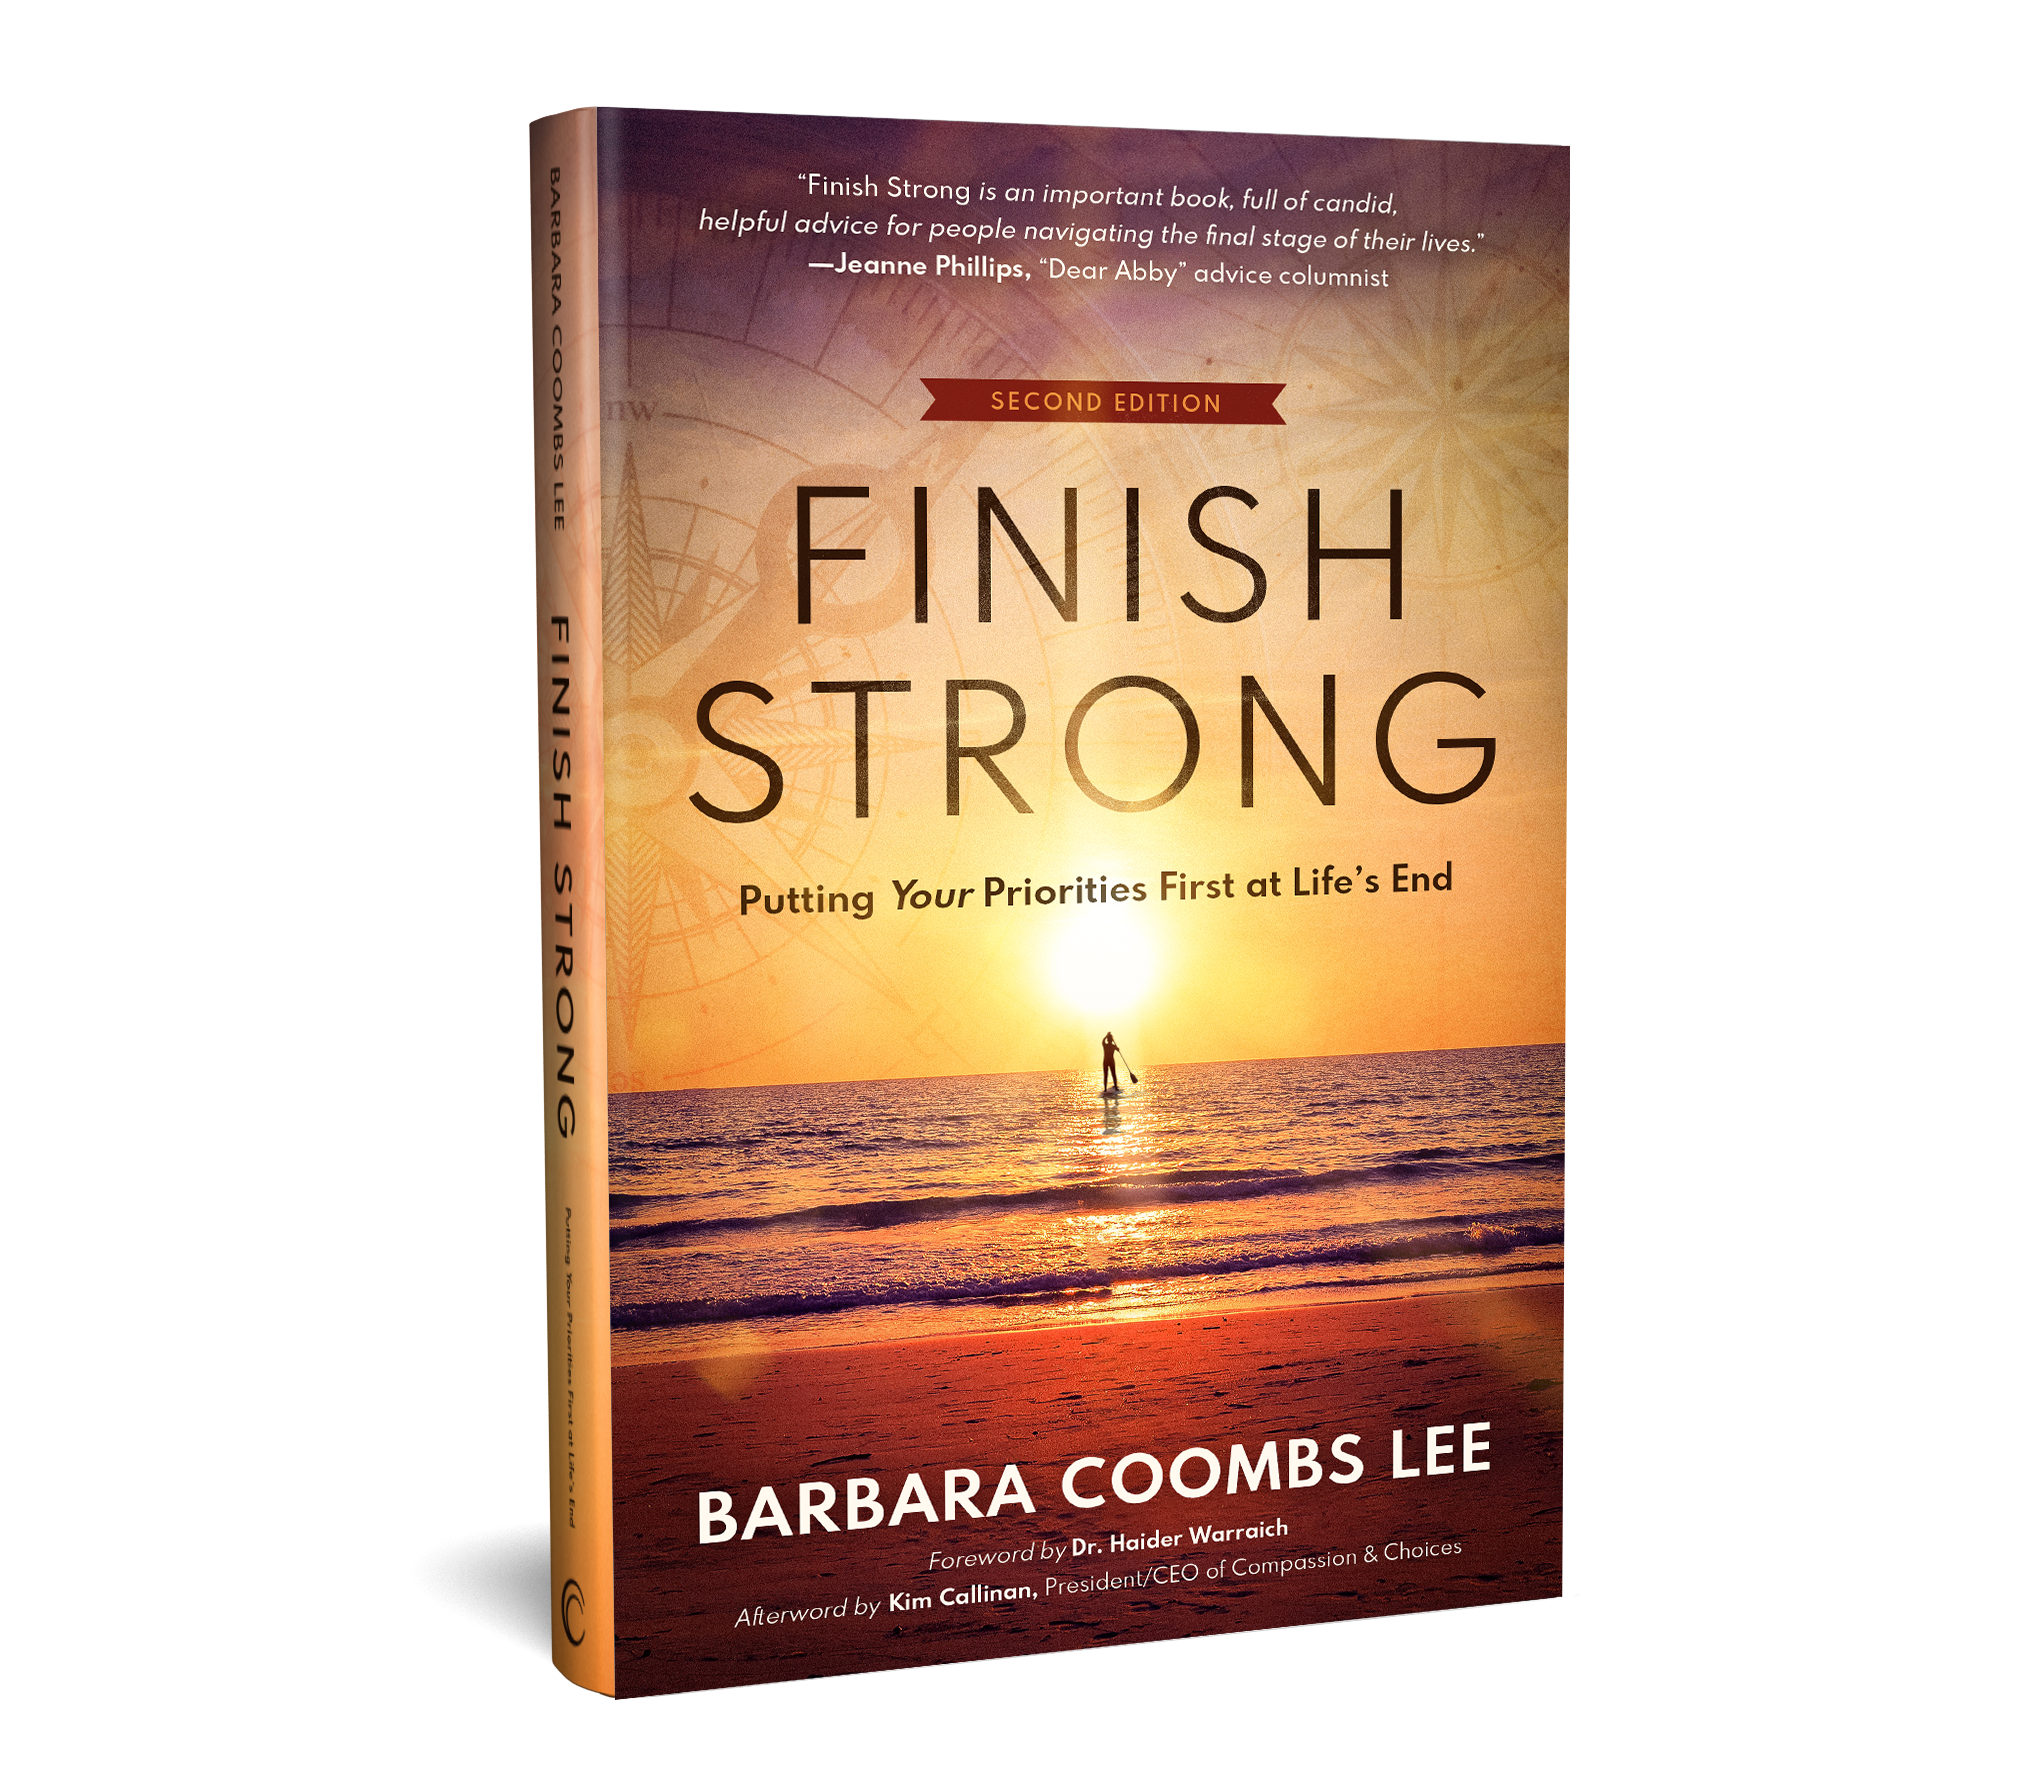 Finish Strong: Putting Your Priorities First at Life’s End, by President Emerita / Senior Adviser of Compassion & Choices, Barbara Combs Lee 